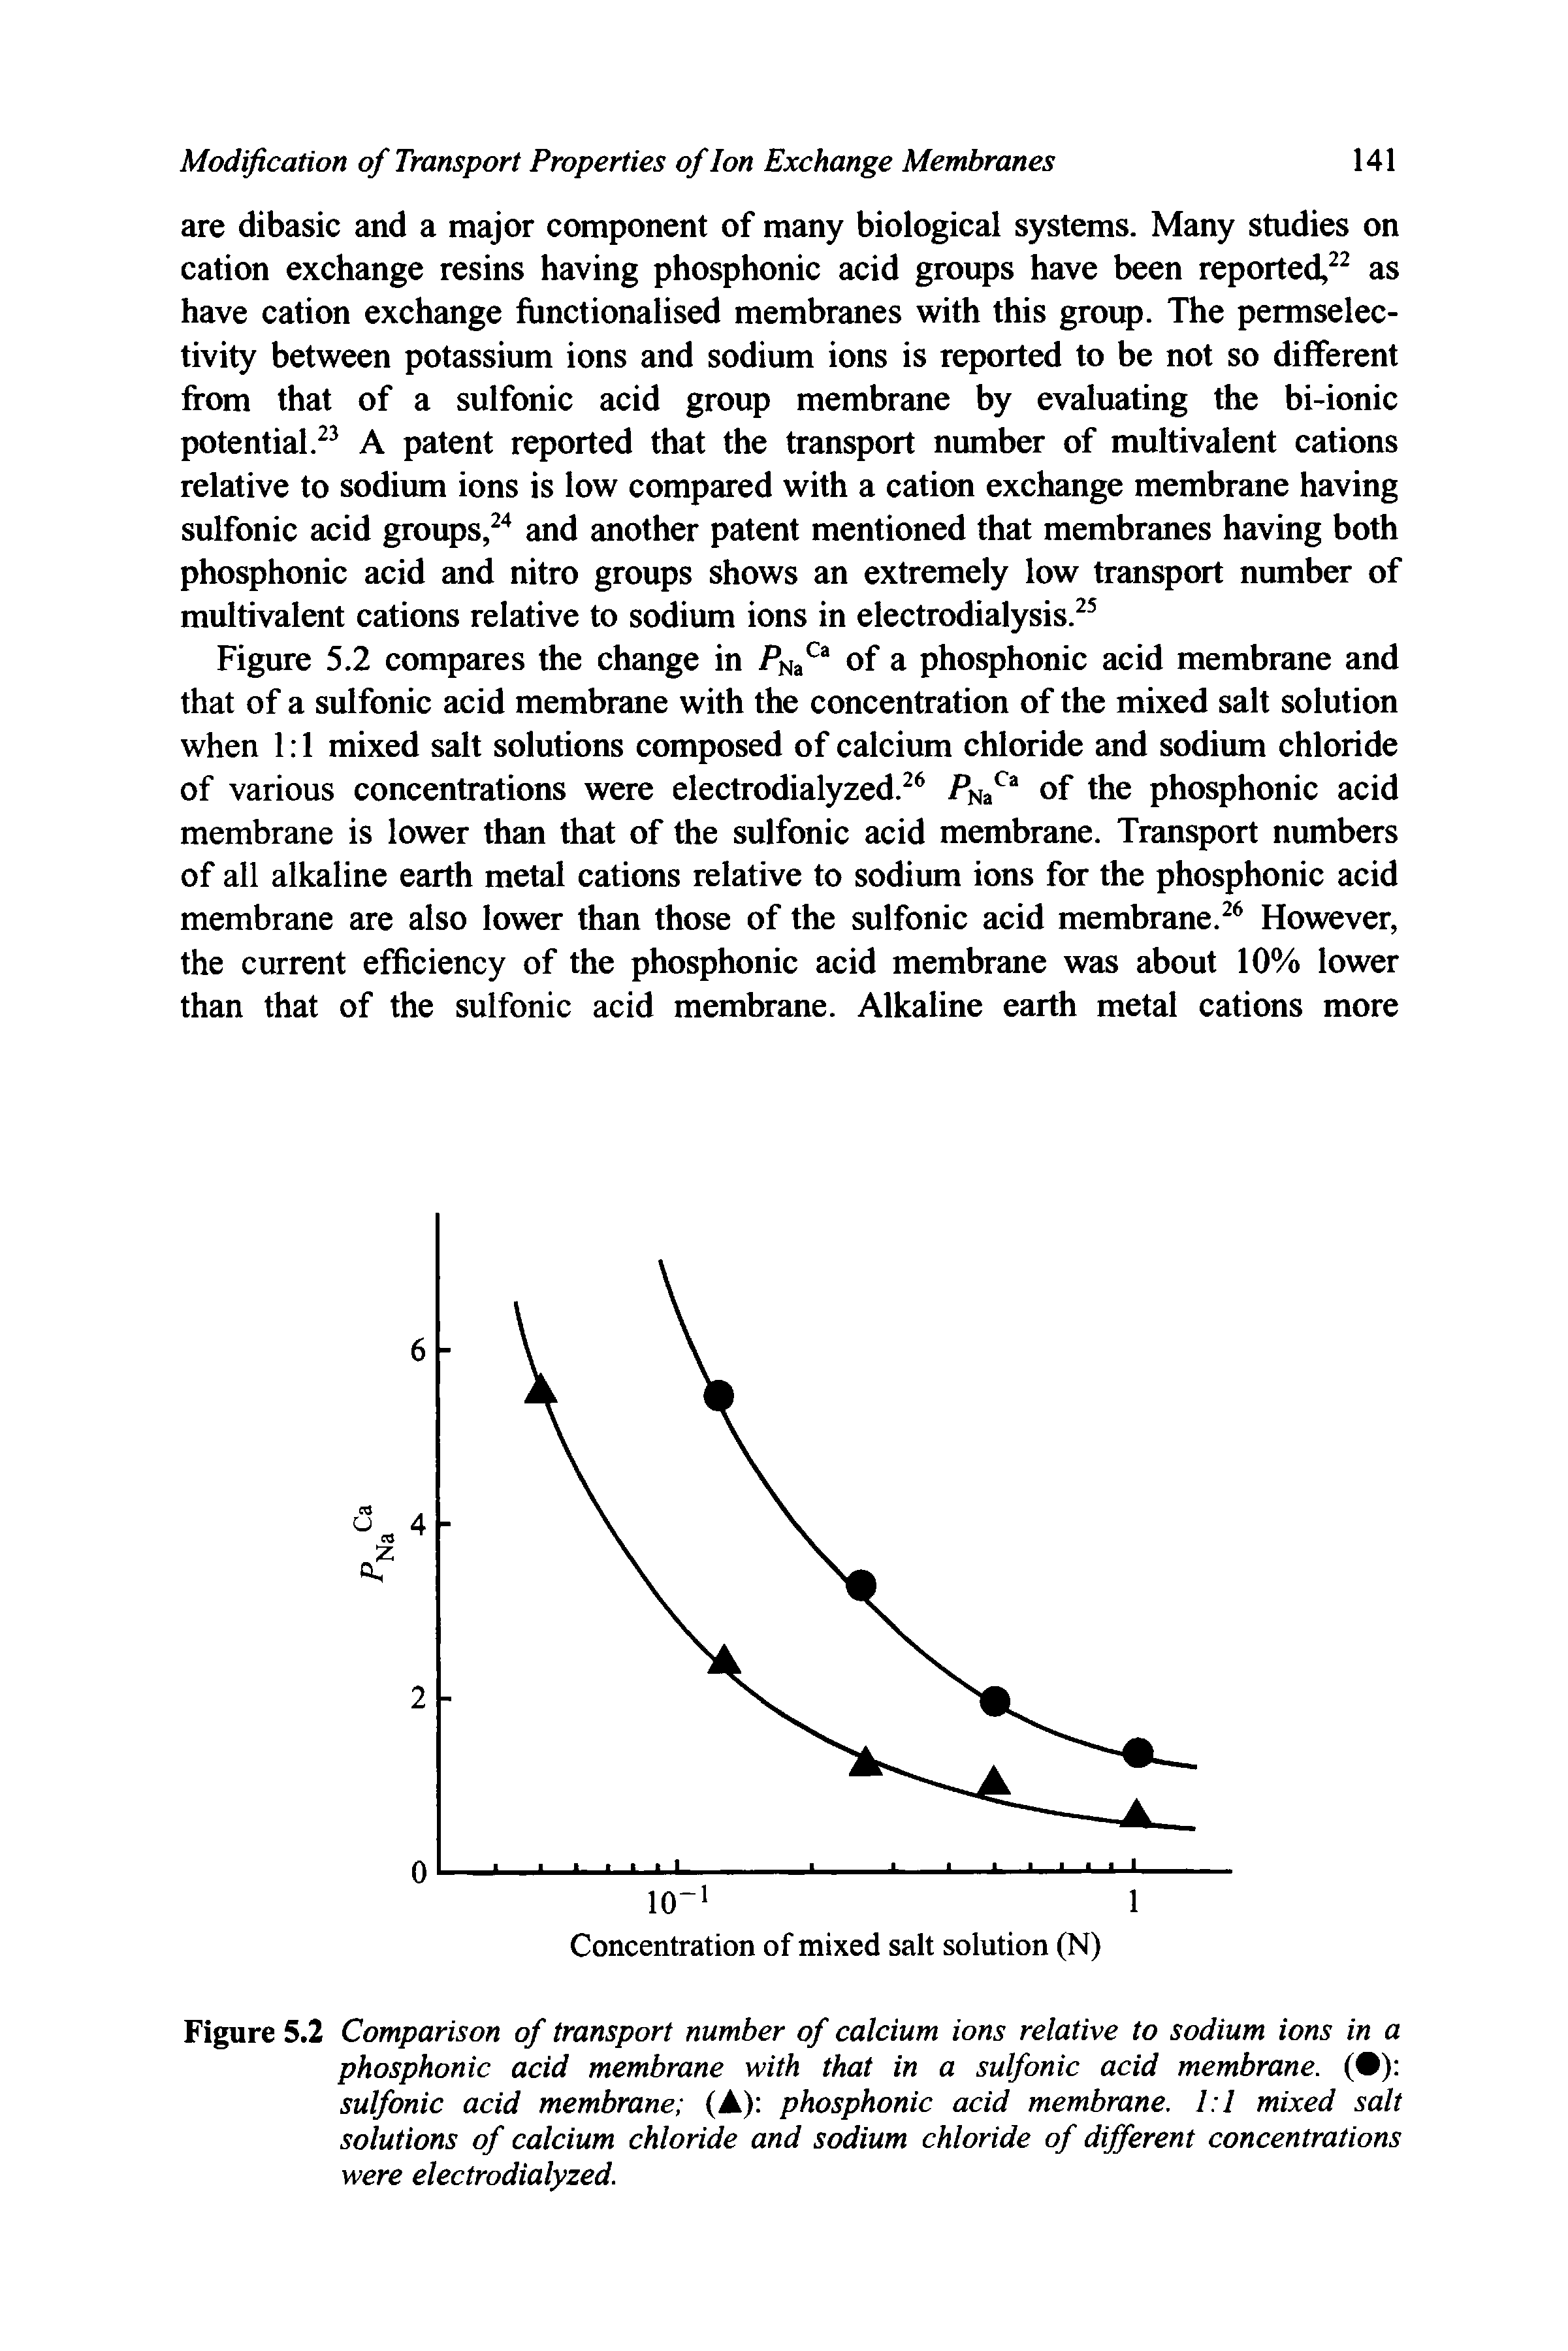 Figure 5.2 Comparison of transport number of calcium ions relative to sodium ions in a phosphonic acid membrane with that in a sulfonic acid membrane. ( ) sulfonic acid membrane (A) phosphonic acid membrane. 1 1 mixed salt solutions of calcium chloride and sodium chloride of different concentrations were electrodialyzed.